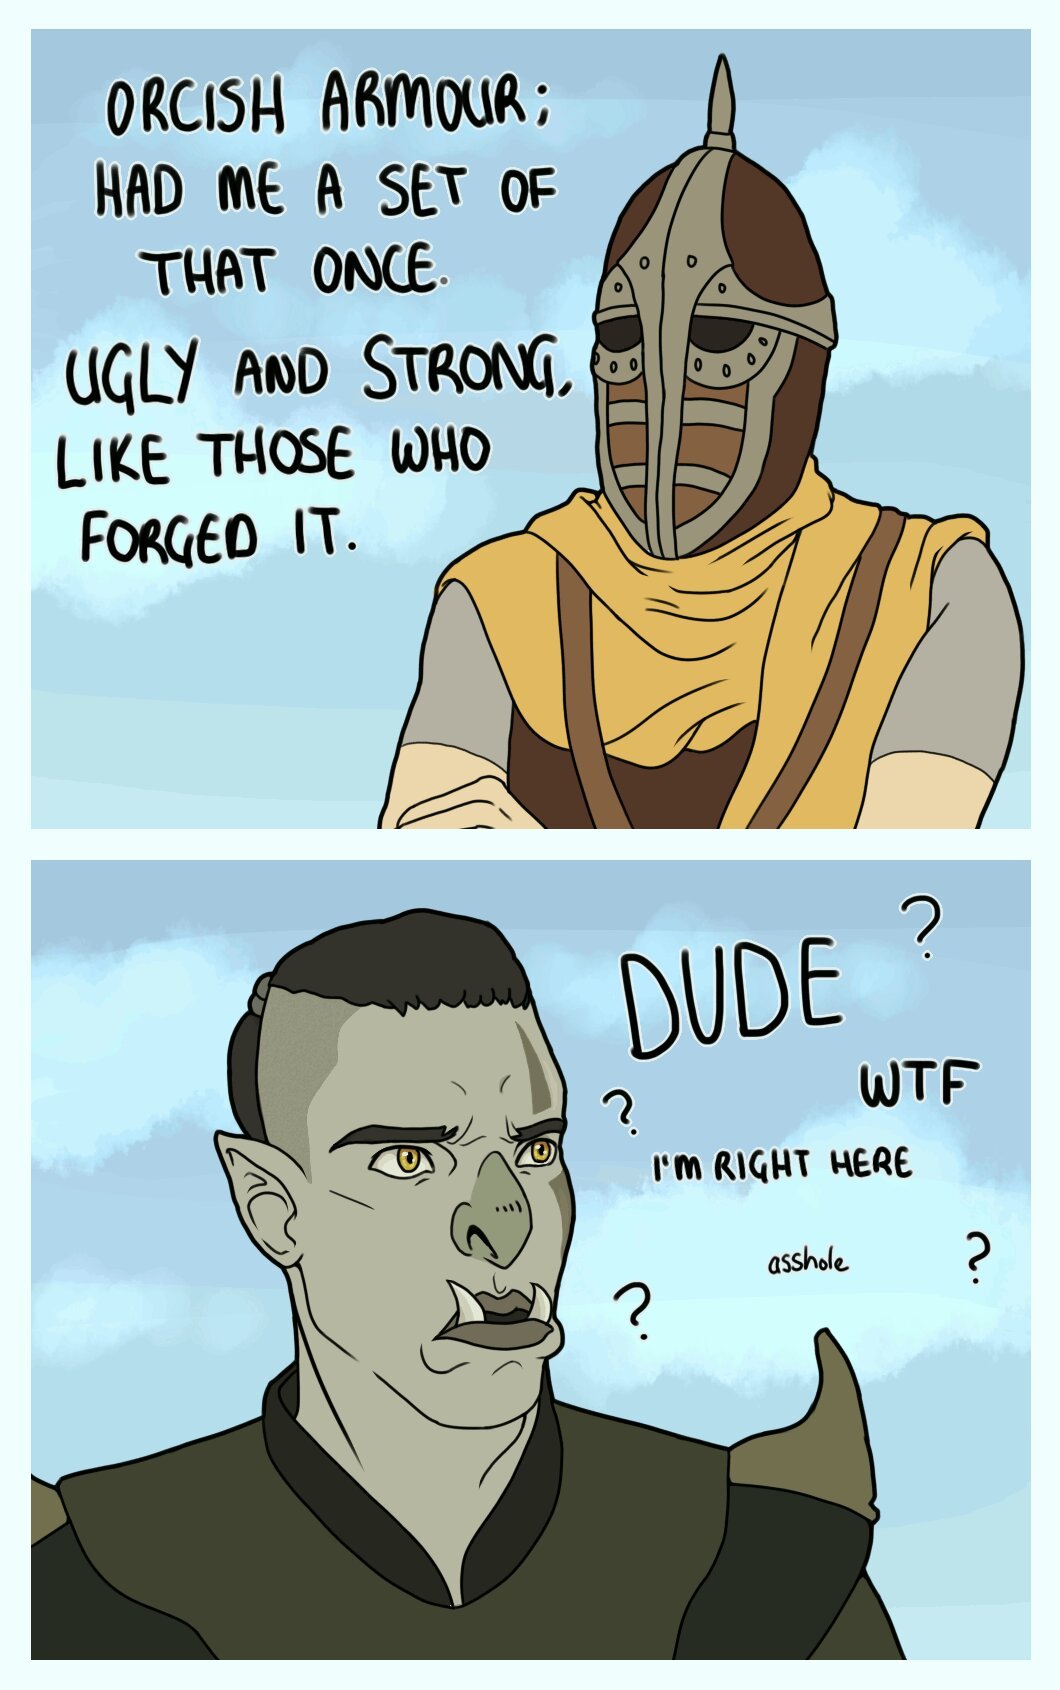 Even orcs have feelings, although i doubt they ugly too - meme